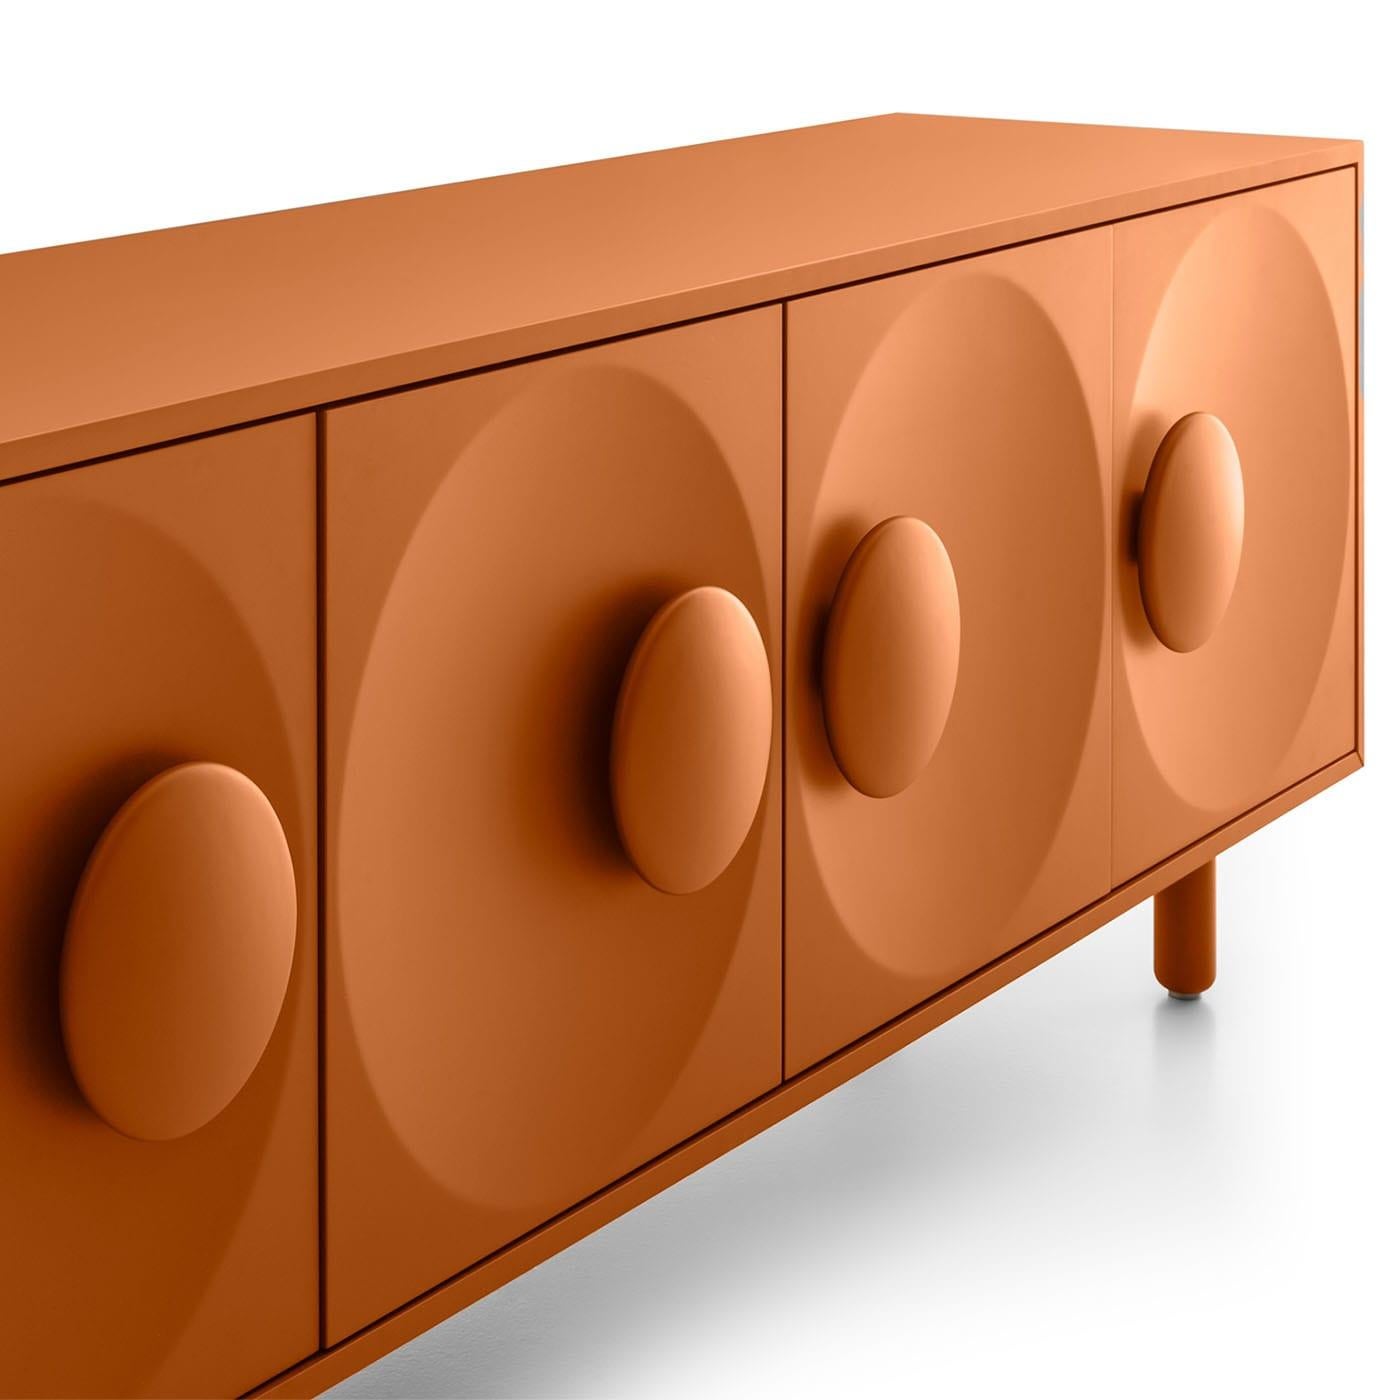 A vibrant and warm terracotta hue lends a seductive sense of authenticity to this sideboard, standing out for its button-like handles inspired by the popularity of sartorial buttons in France during the '20s. Slight concavities also characterize the